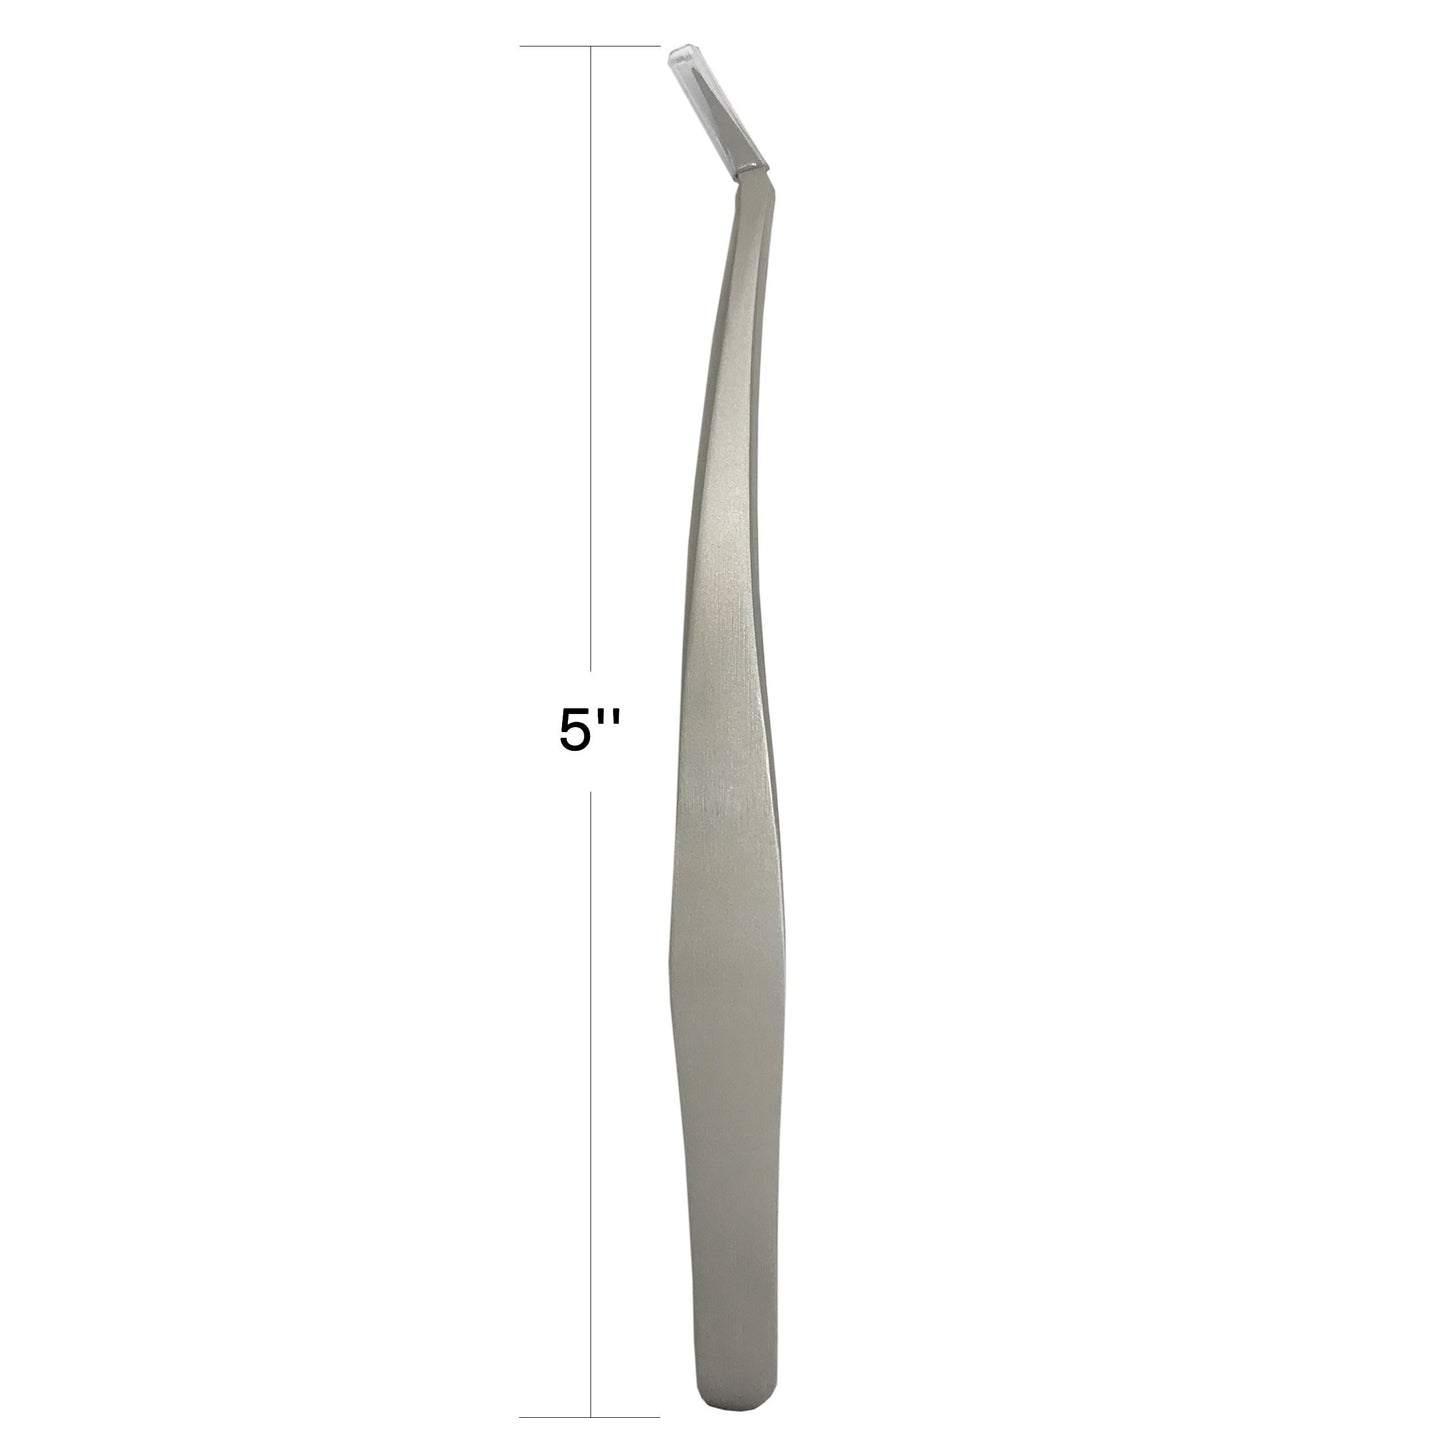 Stainless Steel Eyelash Extension Curved Tweezers - eHair Outlet